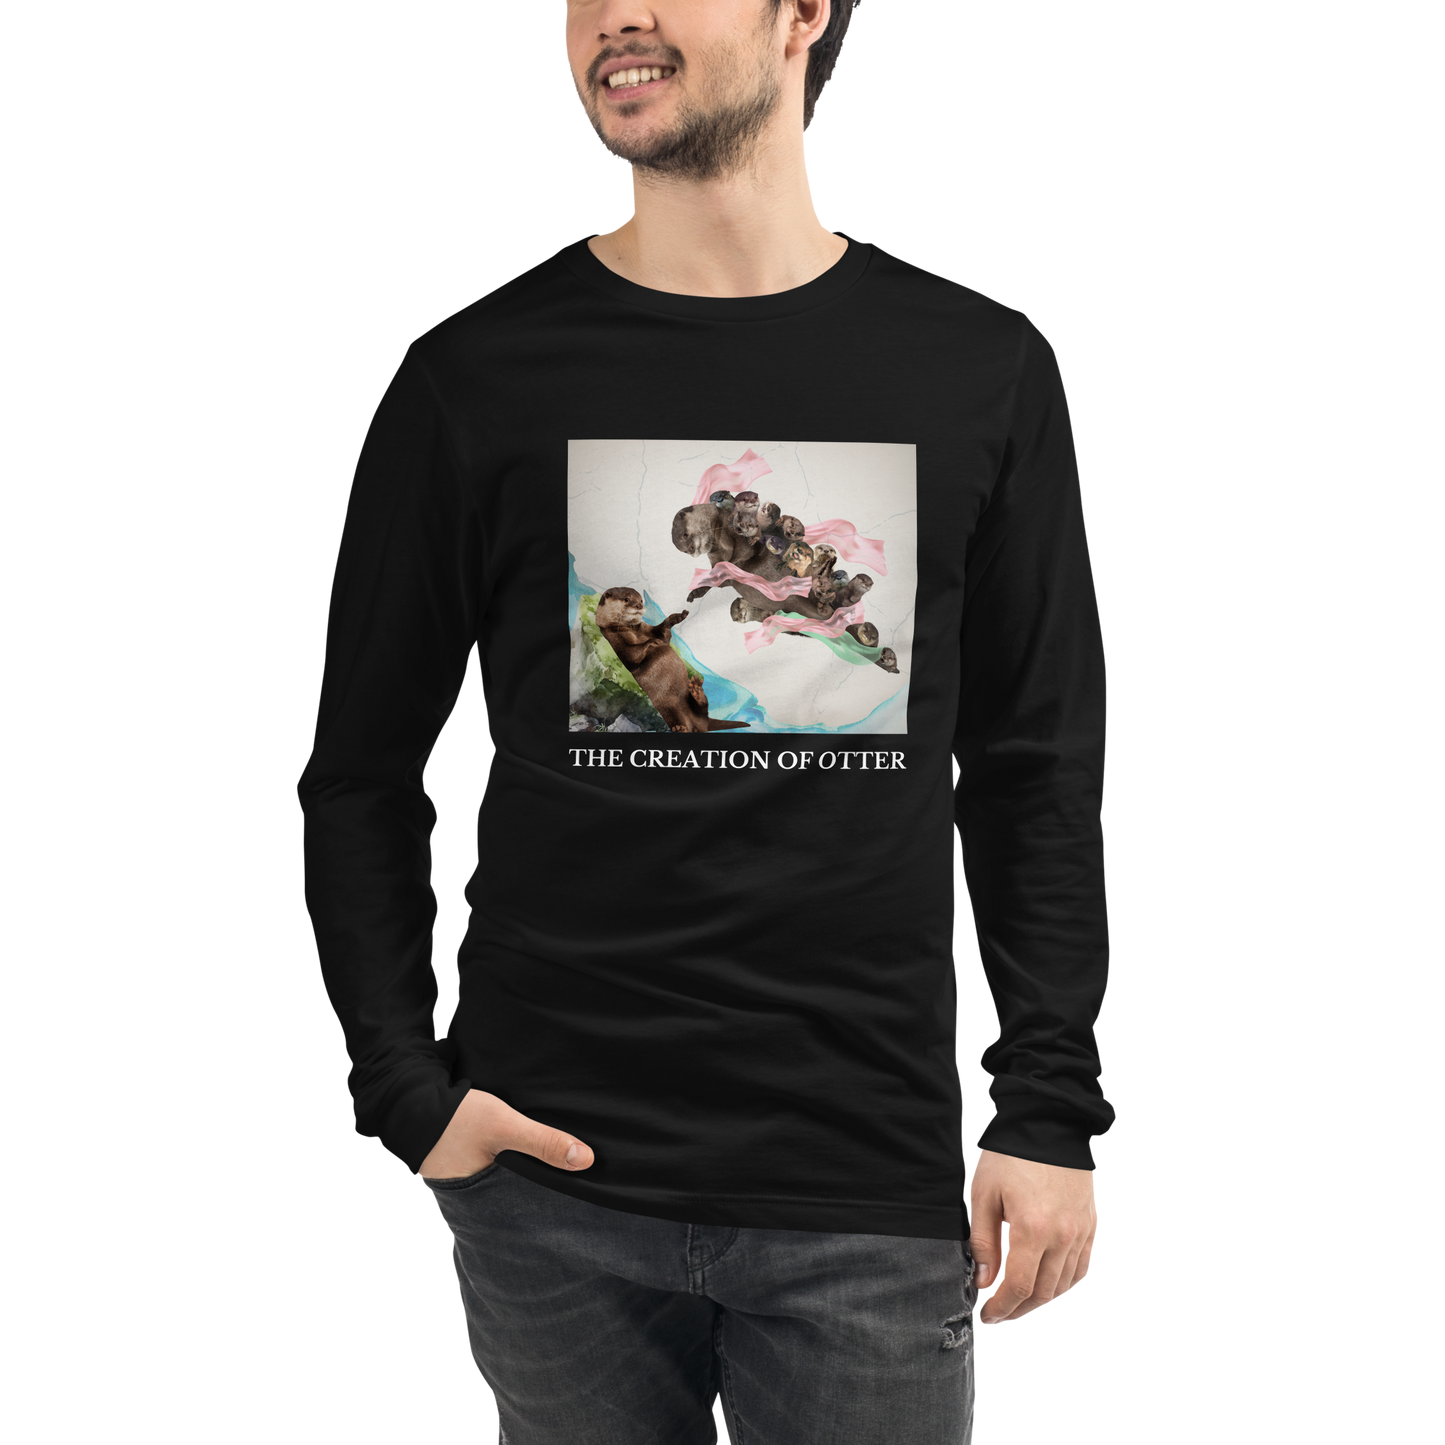 Man wearing a Black Otter Long Sleeve Tee featuring a playful The Creation of Otter parody of Michelangelo's masterpiece - Artsy/Funny Otter Long Sleeve Graphic Tees - Boozy Fox